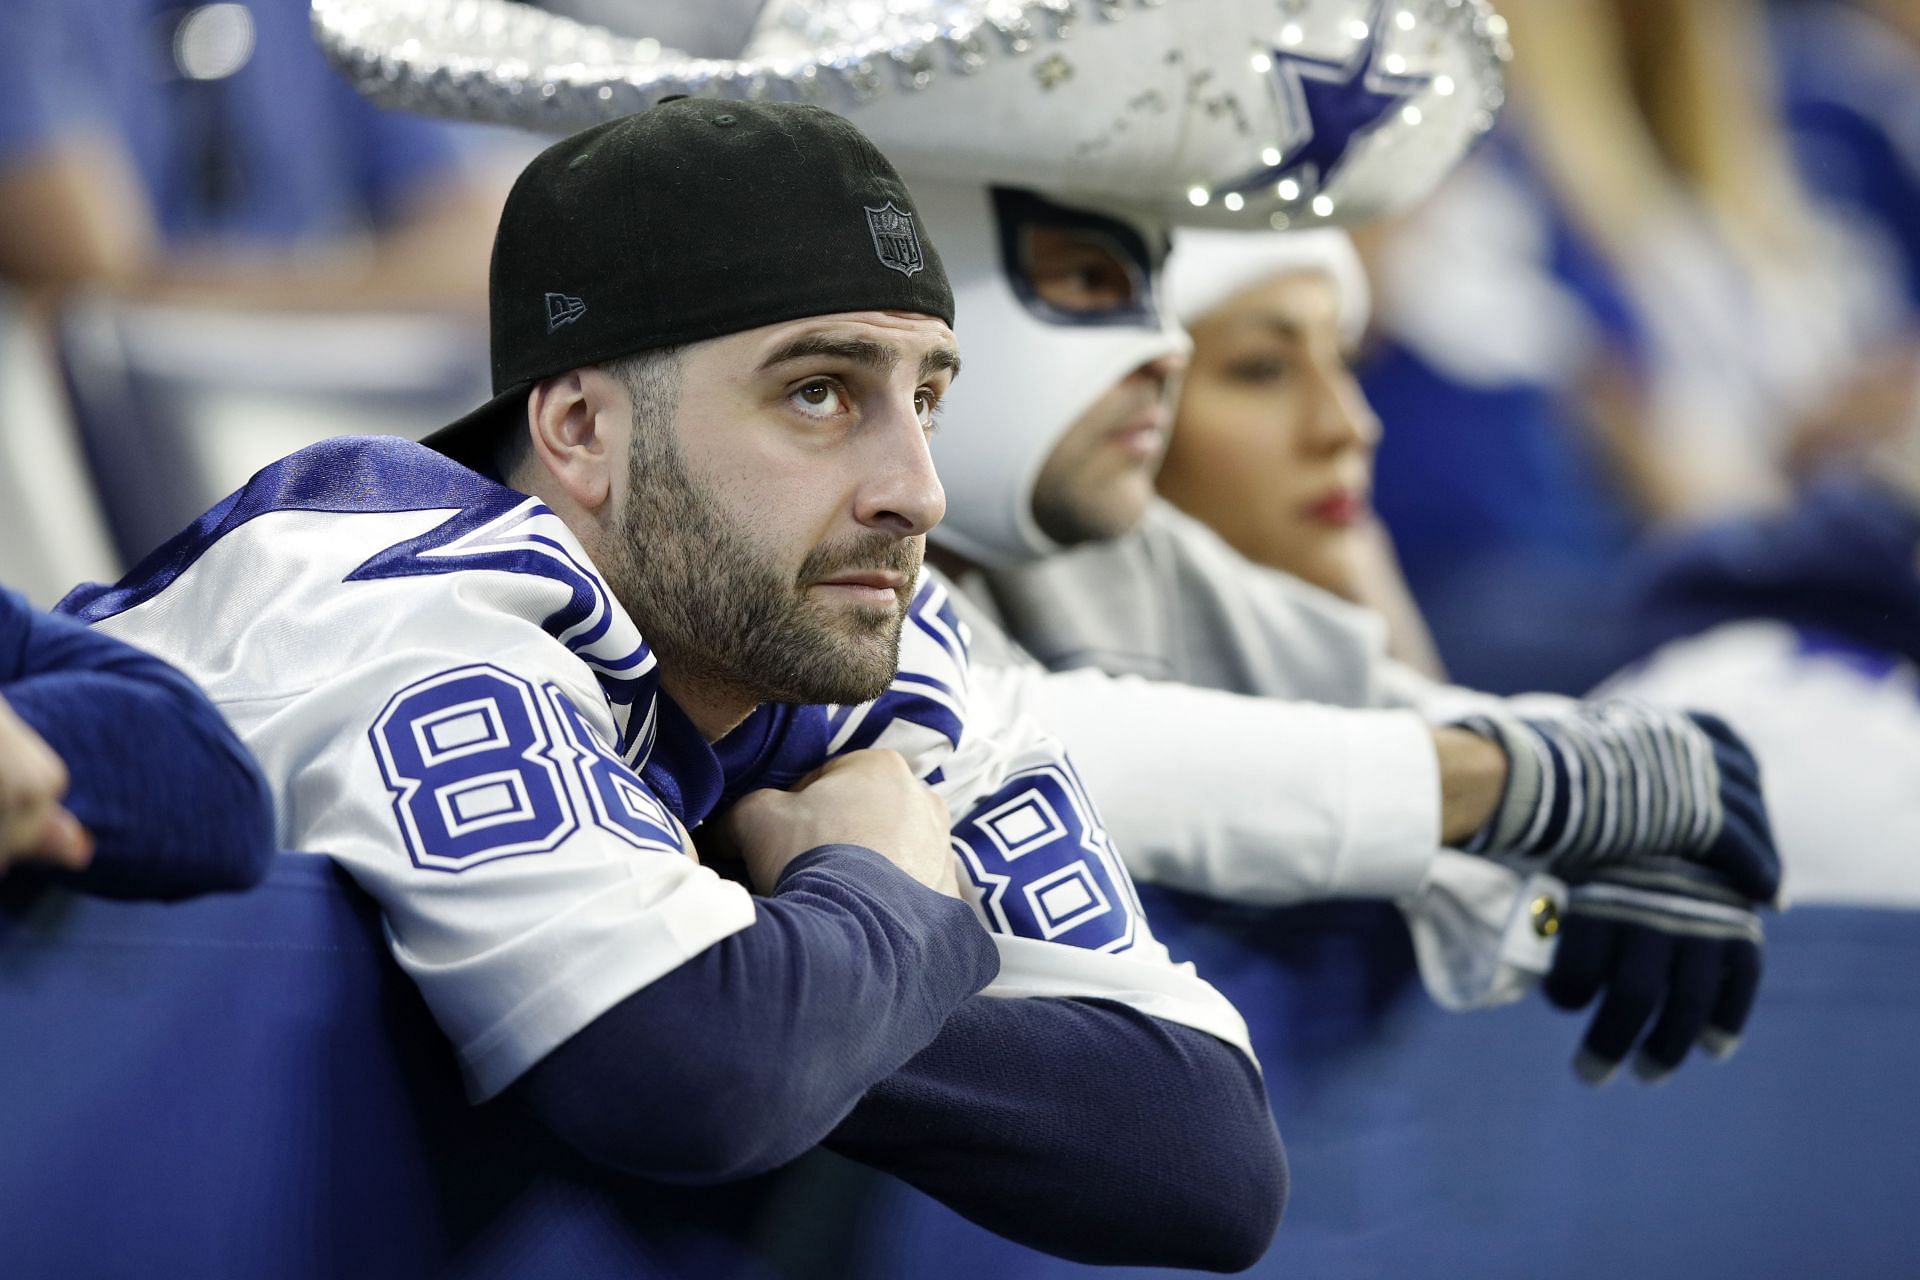 A disappointed Dallas fan watching his team vs Indianapolis Colts